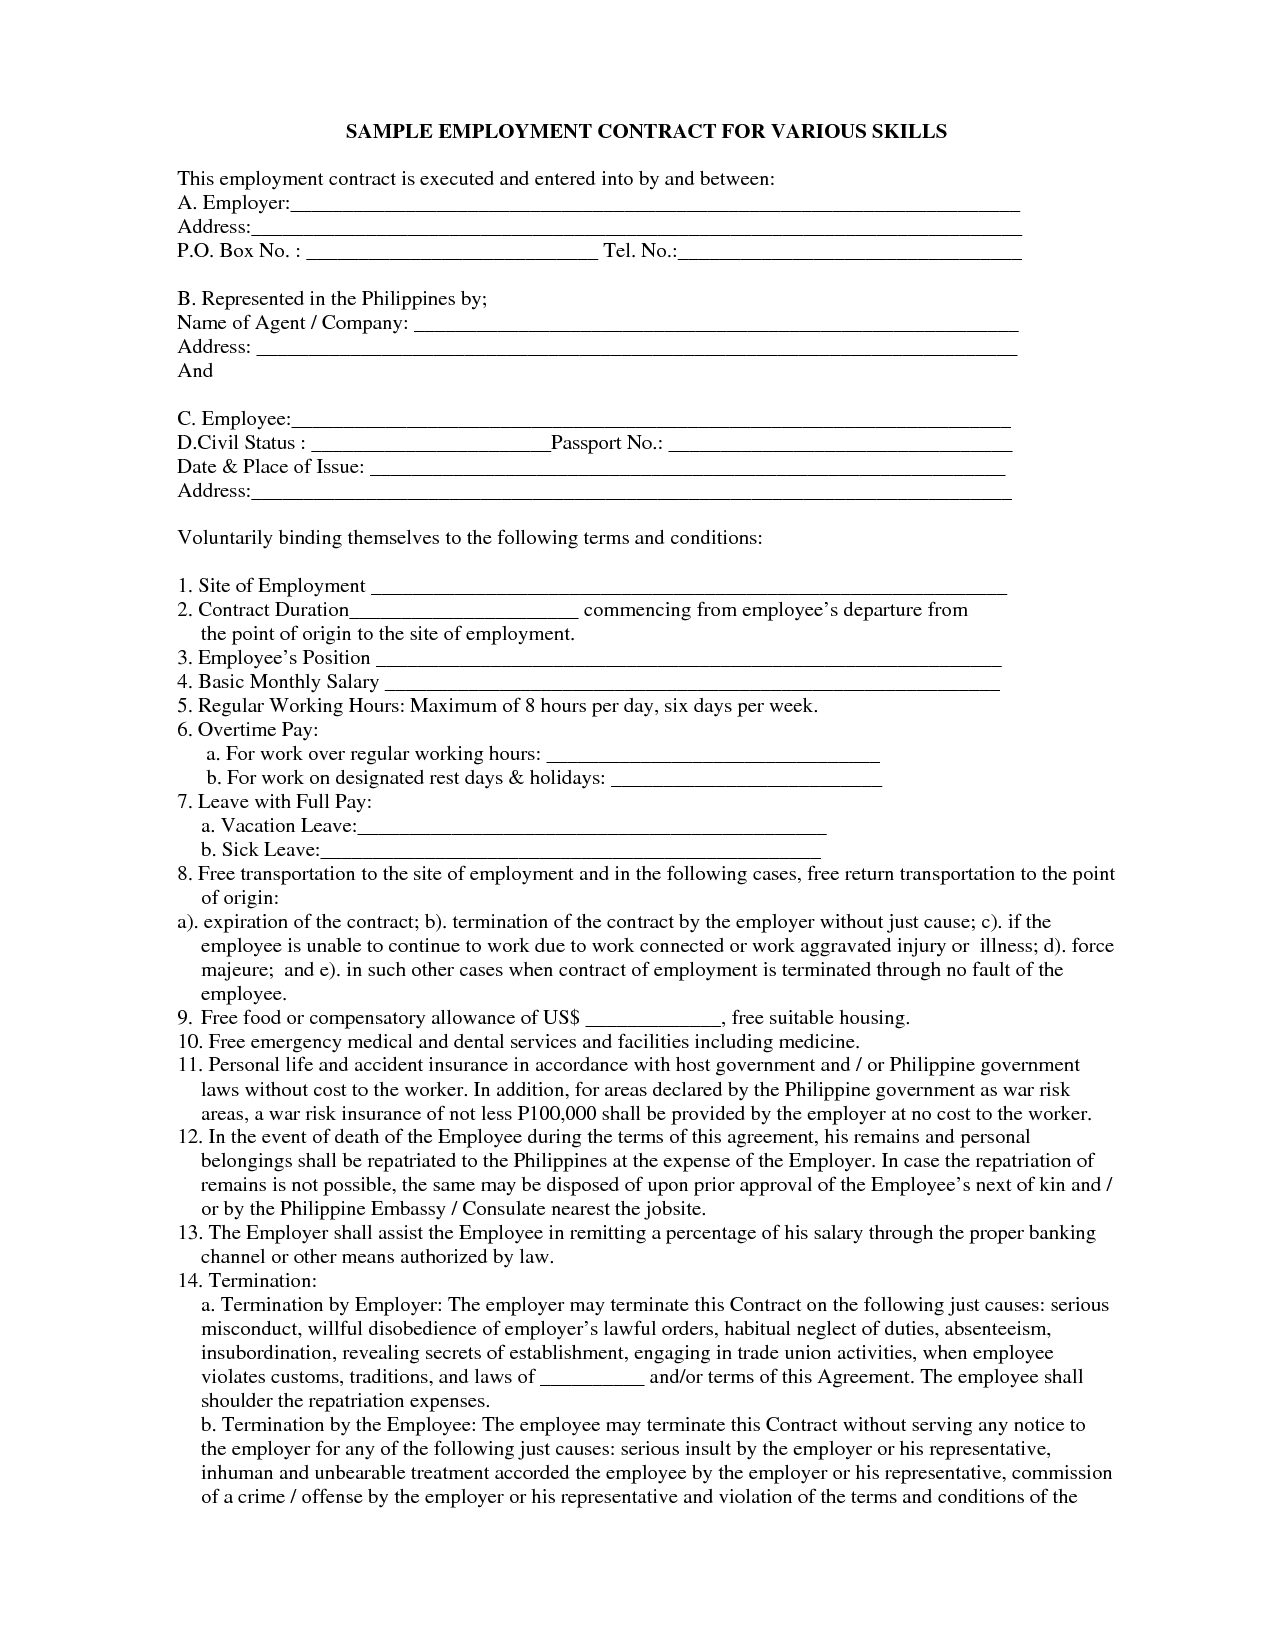 Template: Employment Contract Template - Free Printable Employment Contracts